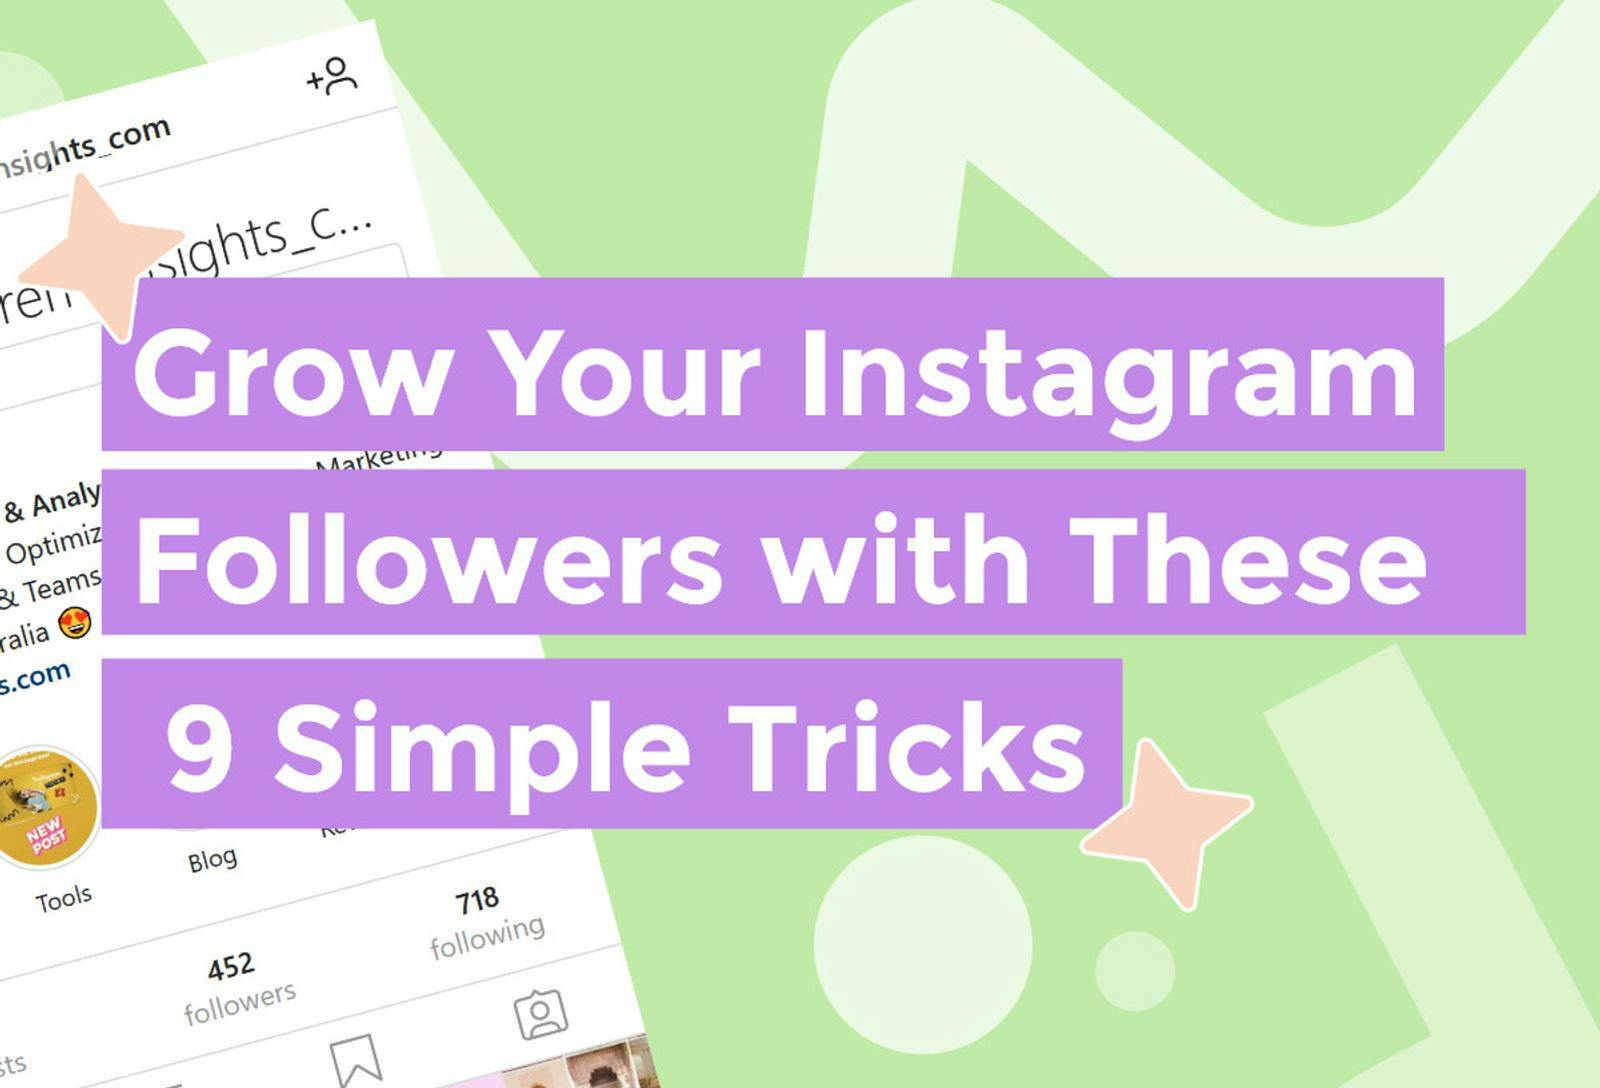 Grow your Instagram with these 9 simple tricks